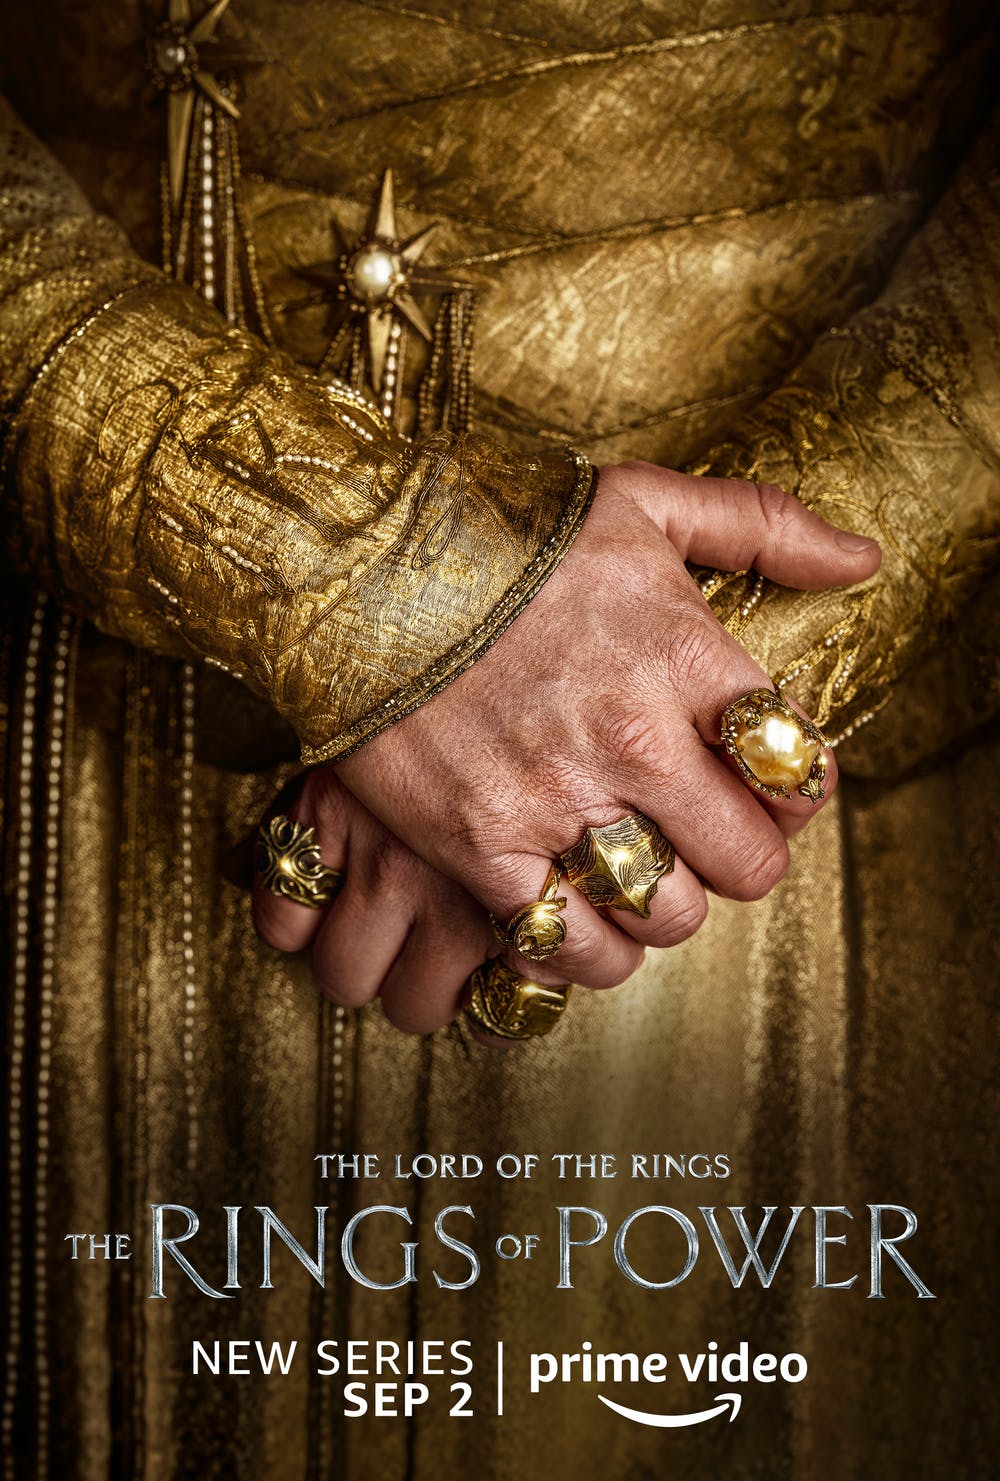 “The Lord of the Rings: The Rings of Power”